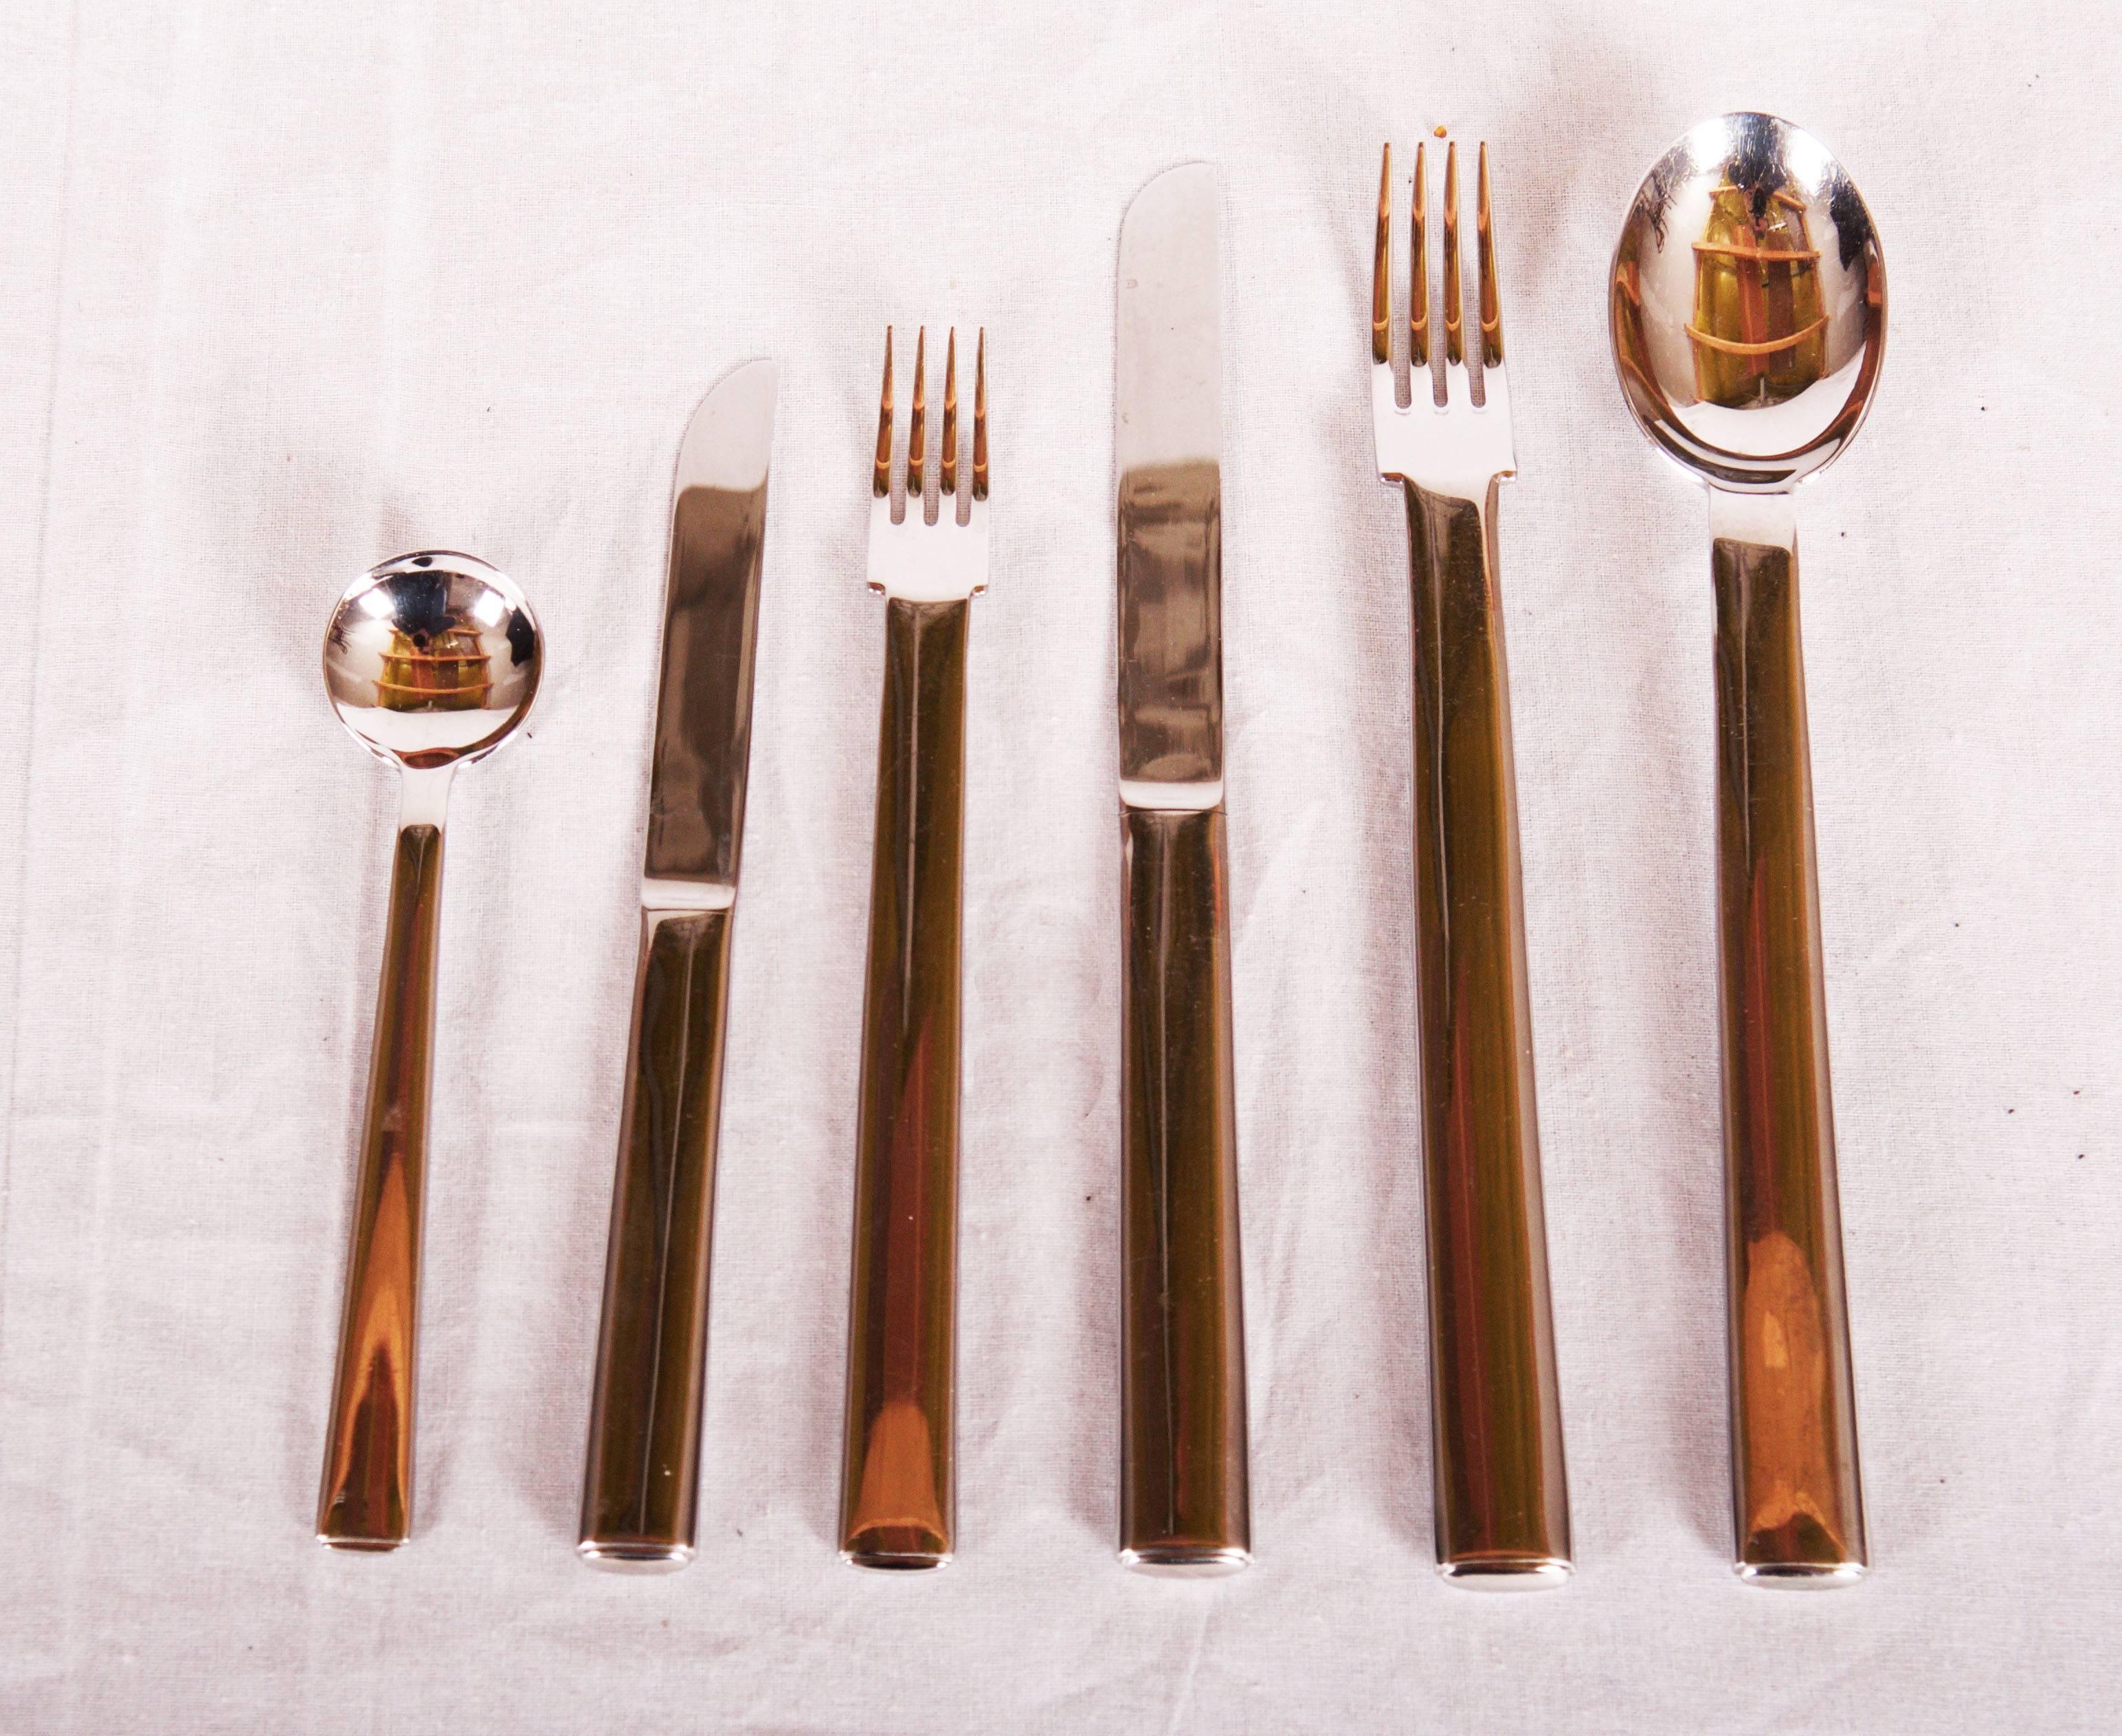 Timeless and elegant design by Josef Hoffmann from 1906 for Wiener Werkstätten.
The last edition from the year 2000 made by officina ALESSI under license of M.A.K. (Museum of Applied Arts) in Vienna.
The cutlery consist of  36 parts (for 6